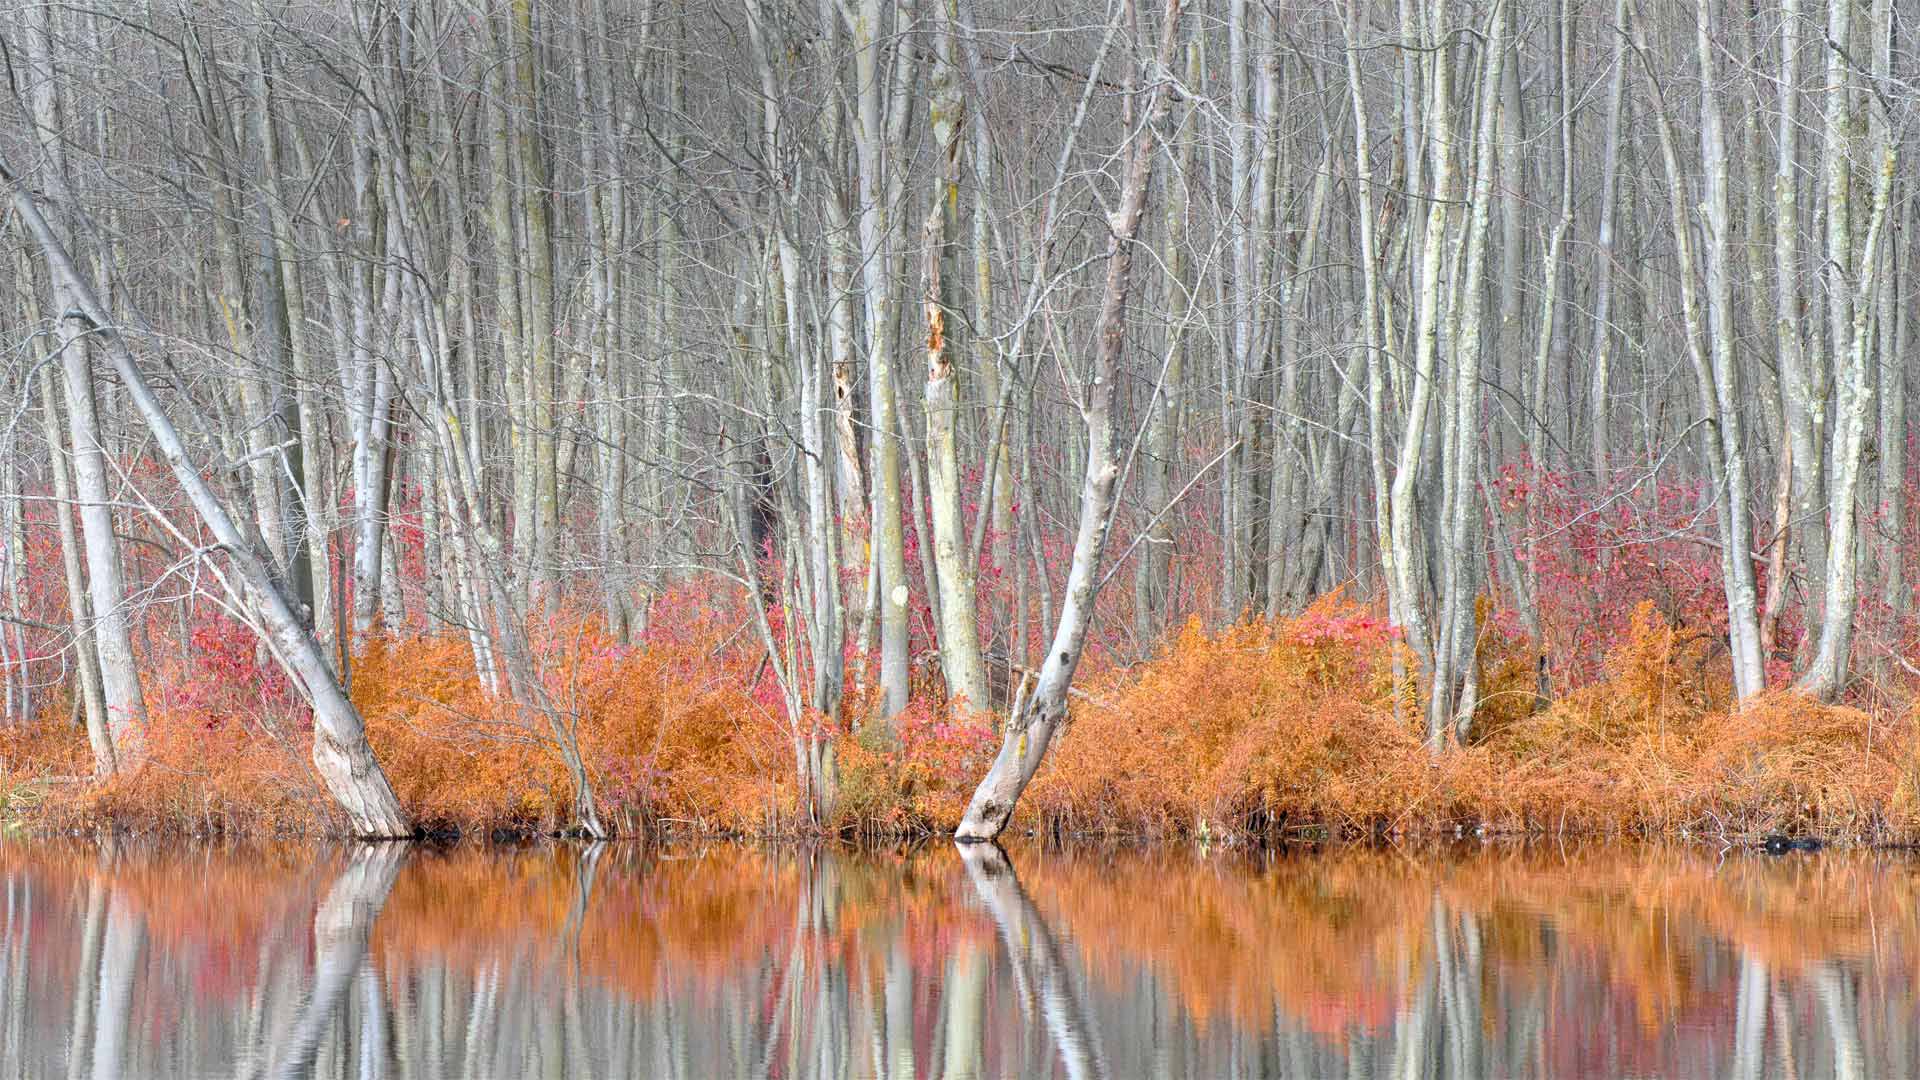 Bare trees and autumn ferns in Beaver Lake Nature Center, New York - Chris Murray/Alamy)